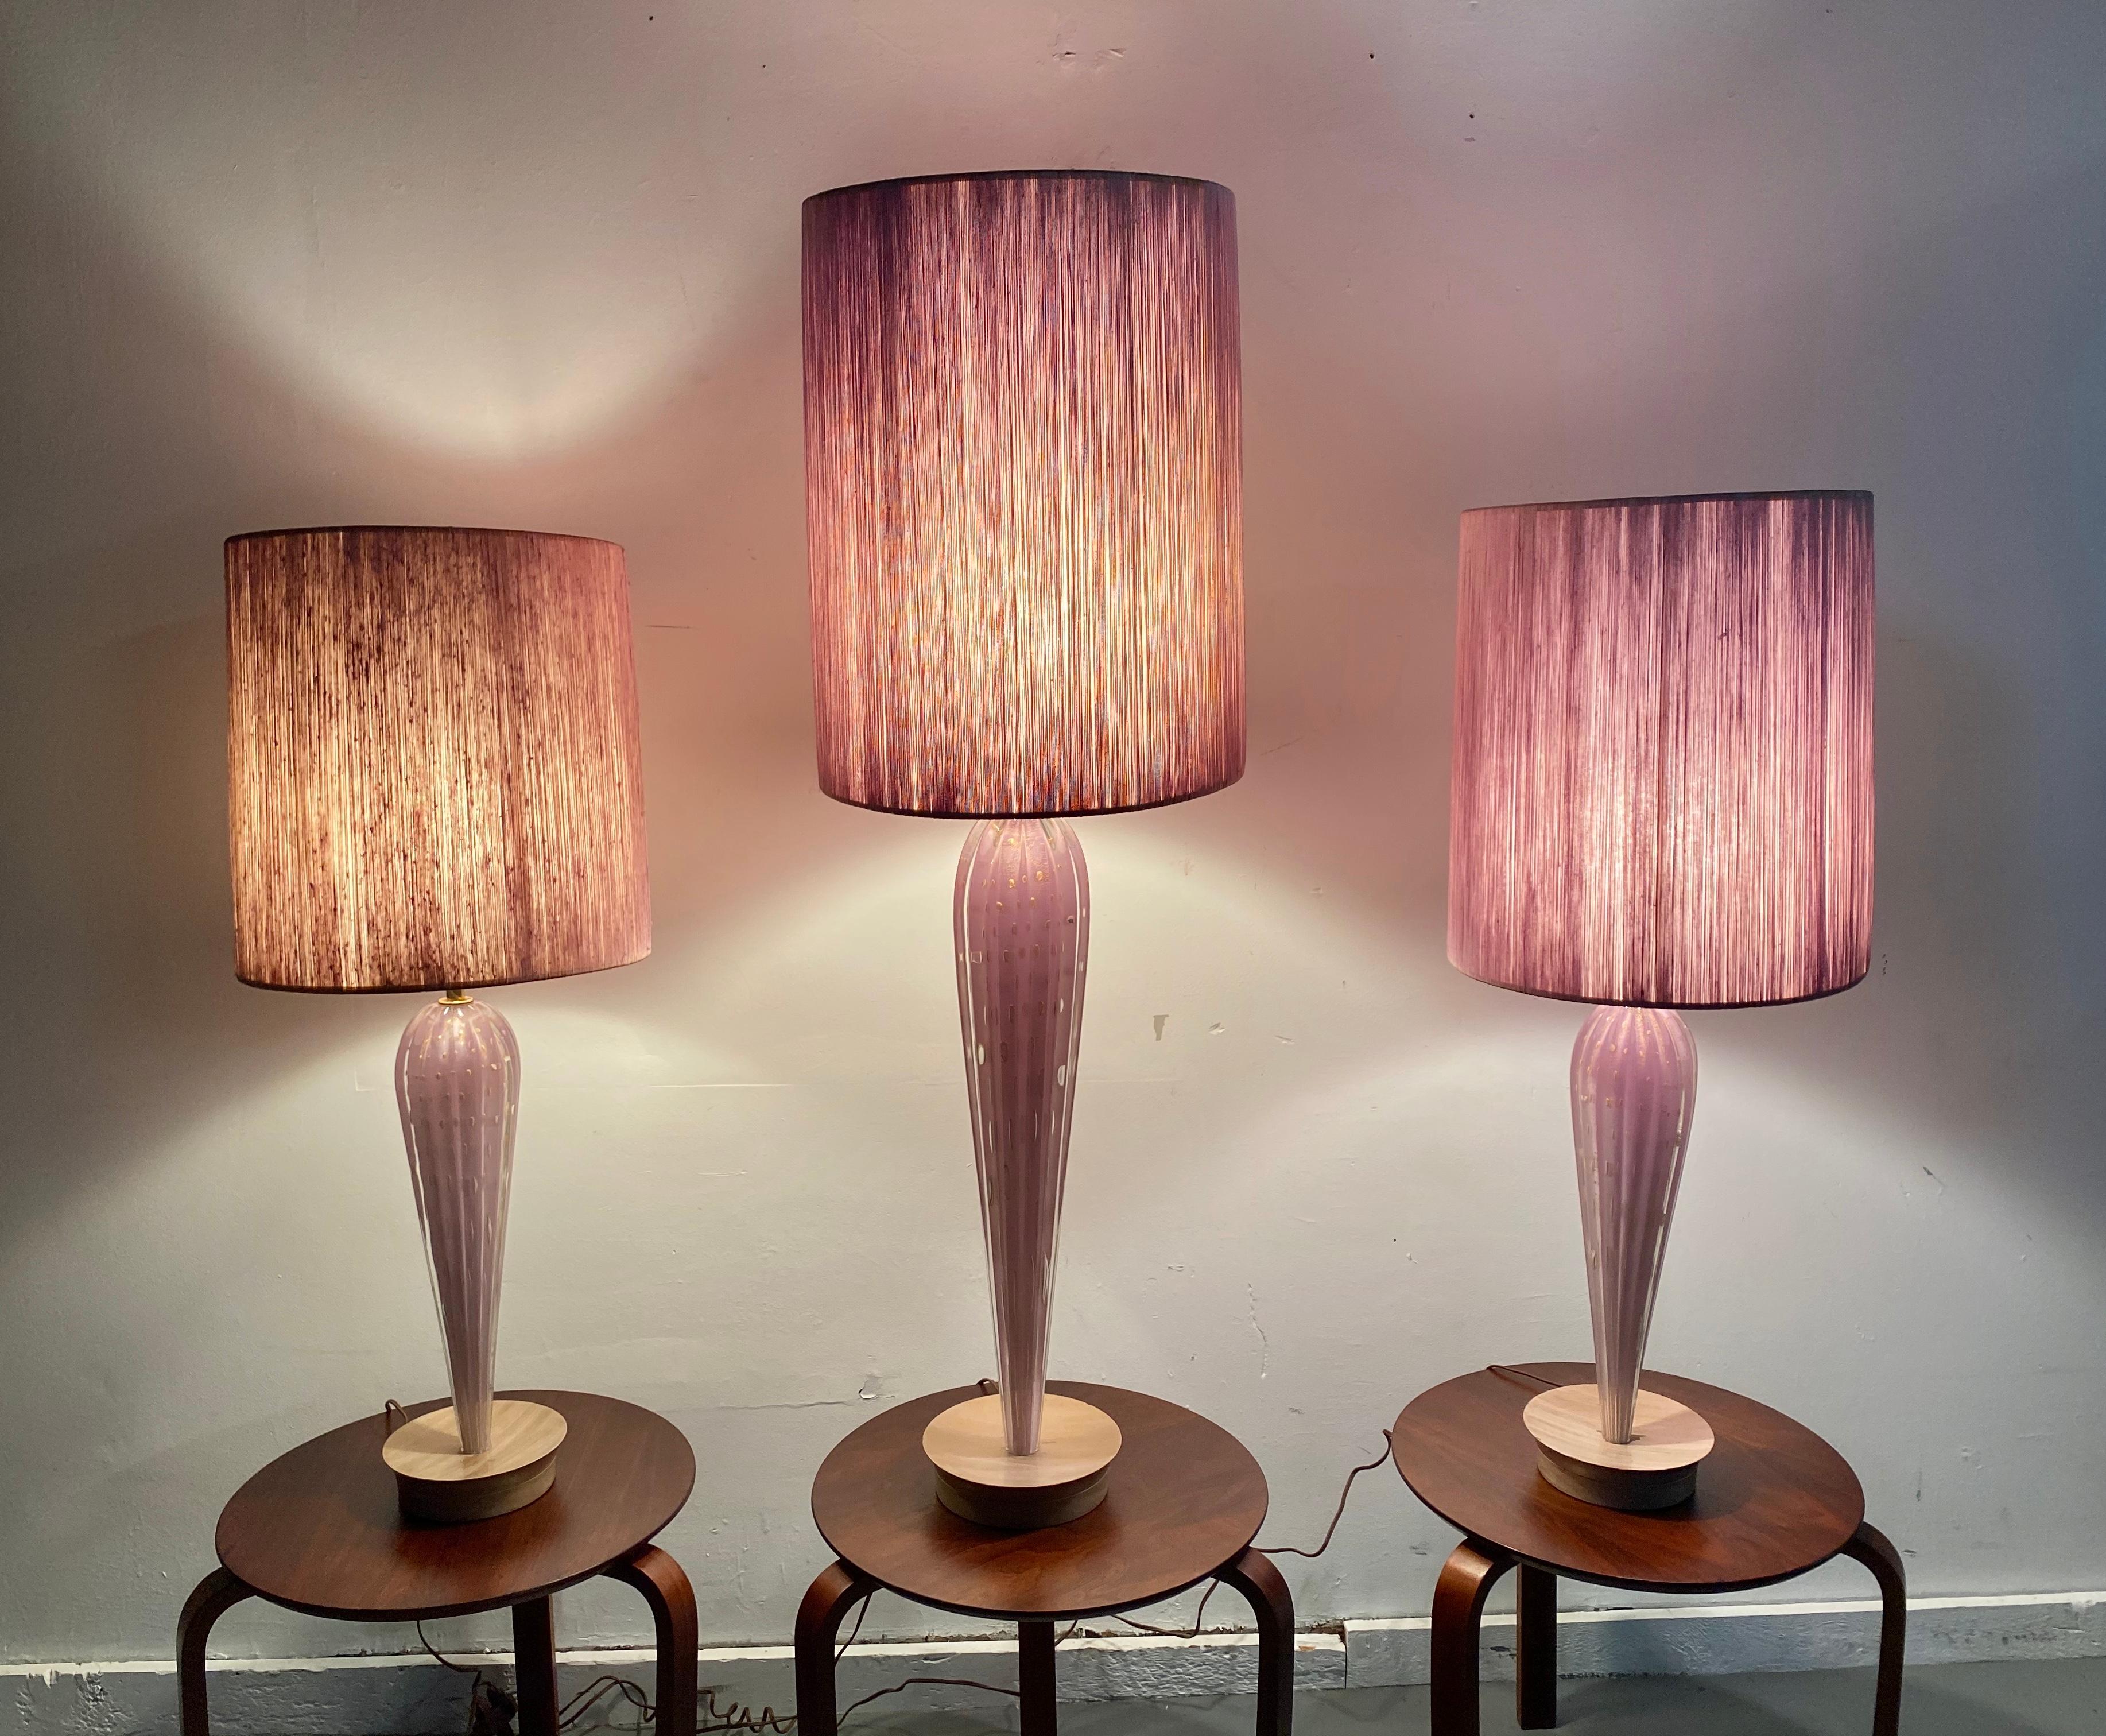 Stunning set 3 Modernist Murano lamps, by Seguso, Outragous lavender color, great modernist form, hand blown, controlled bubbles, retain original silk string lamp shades. Large center lamp measures 45